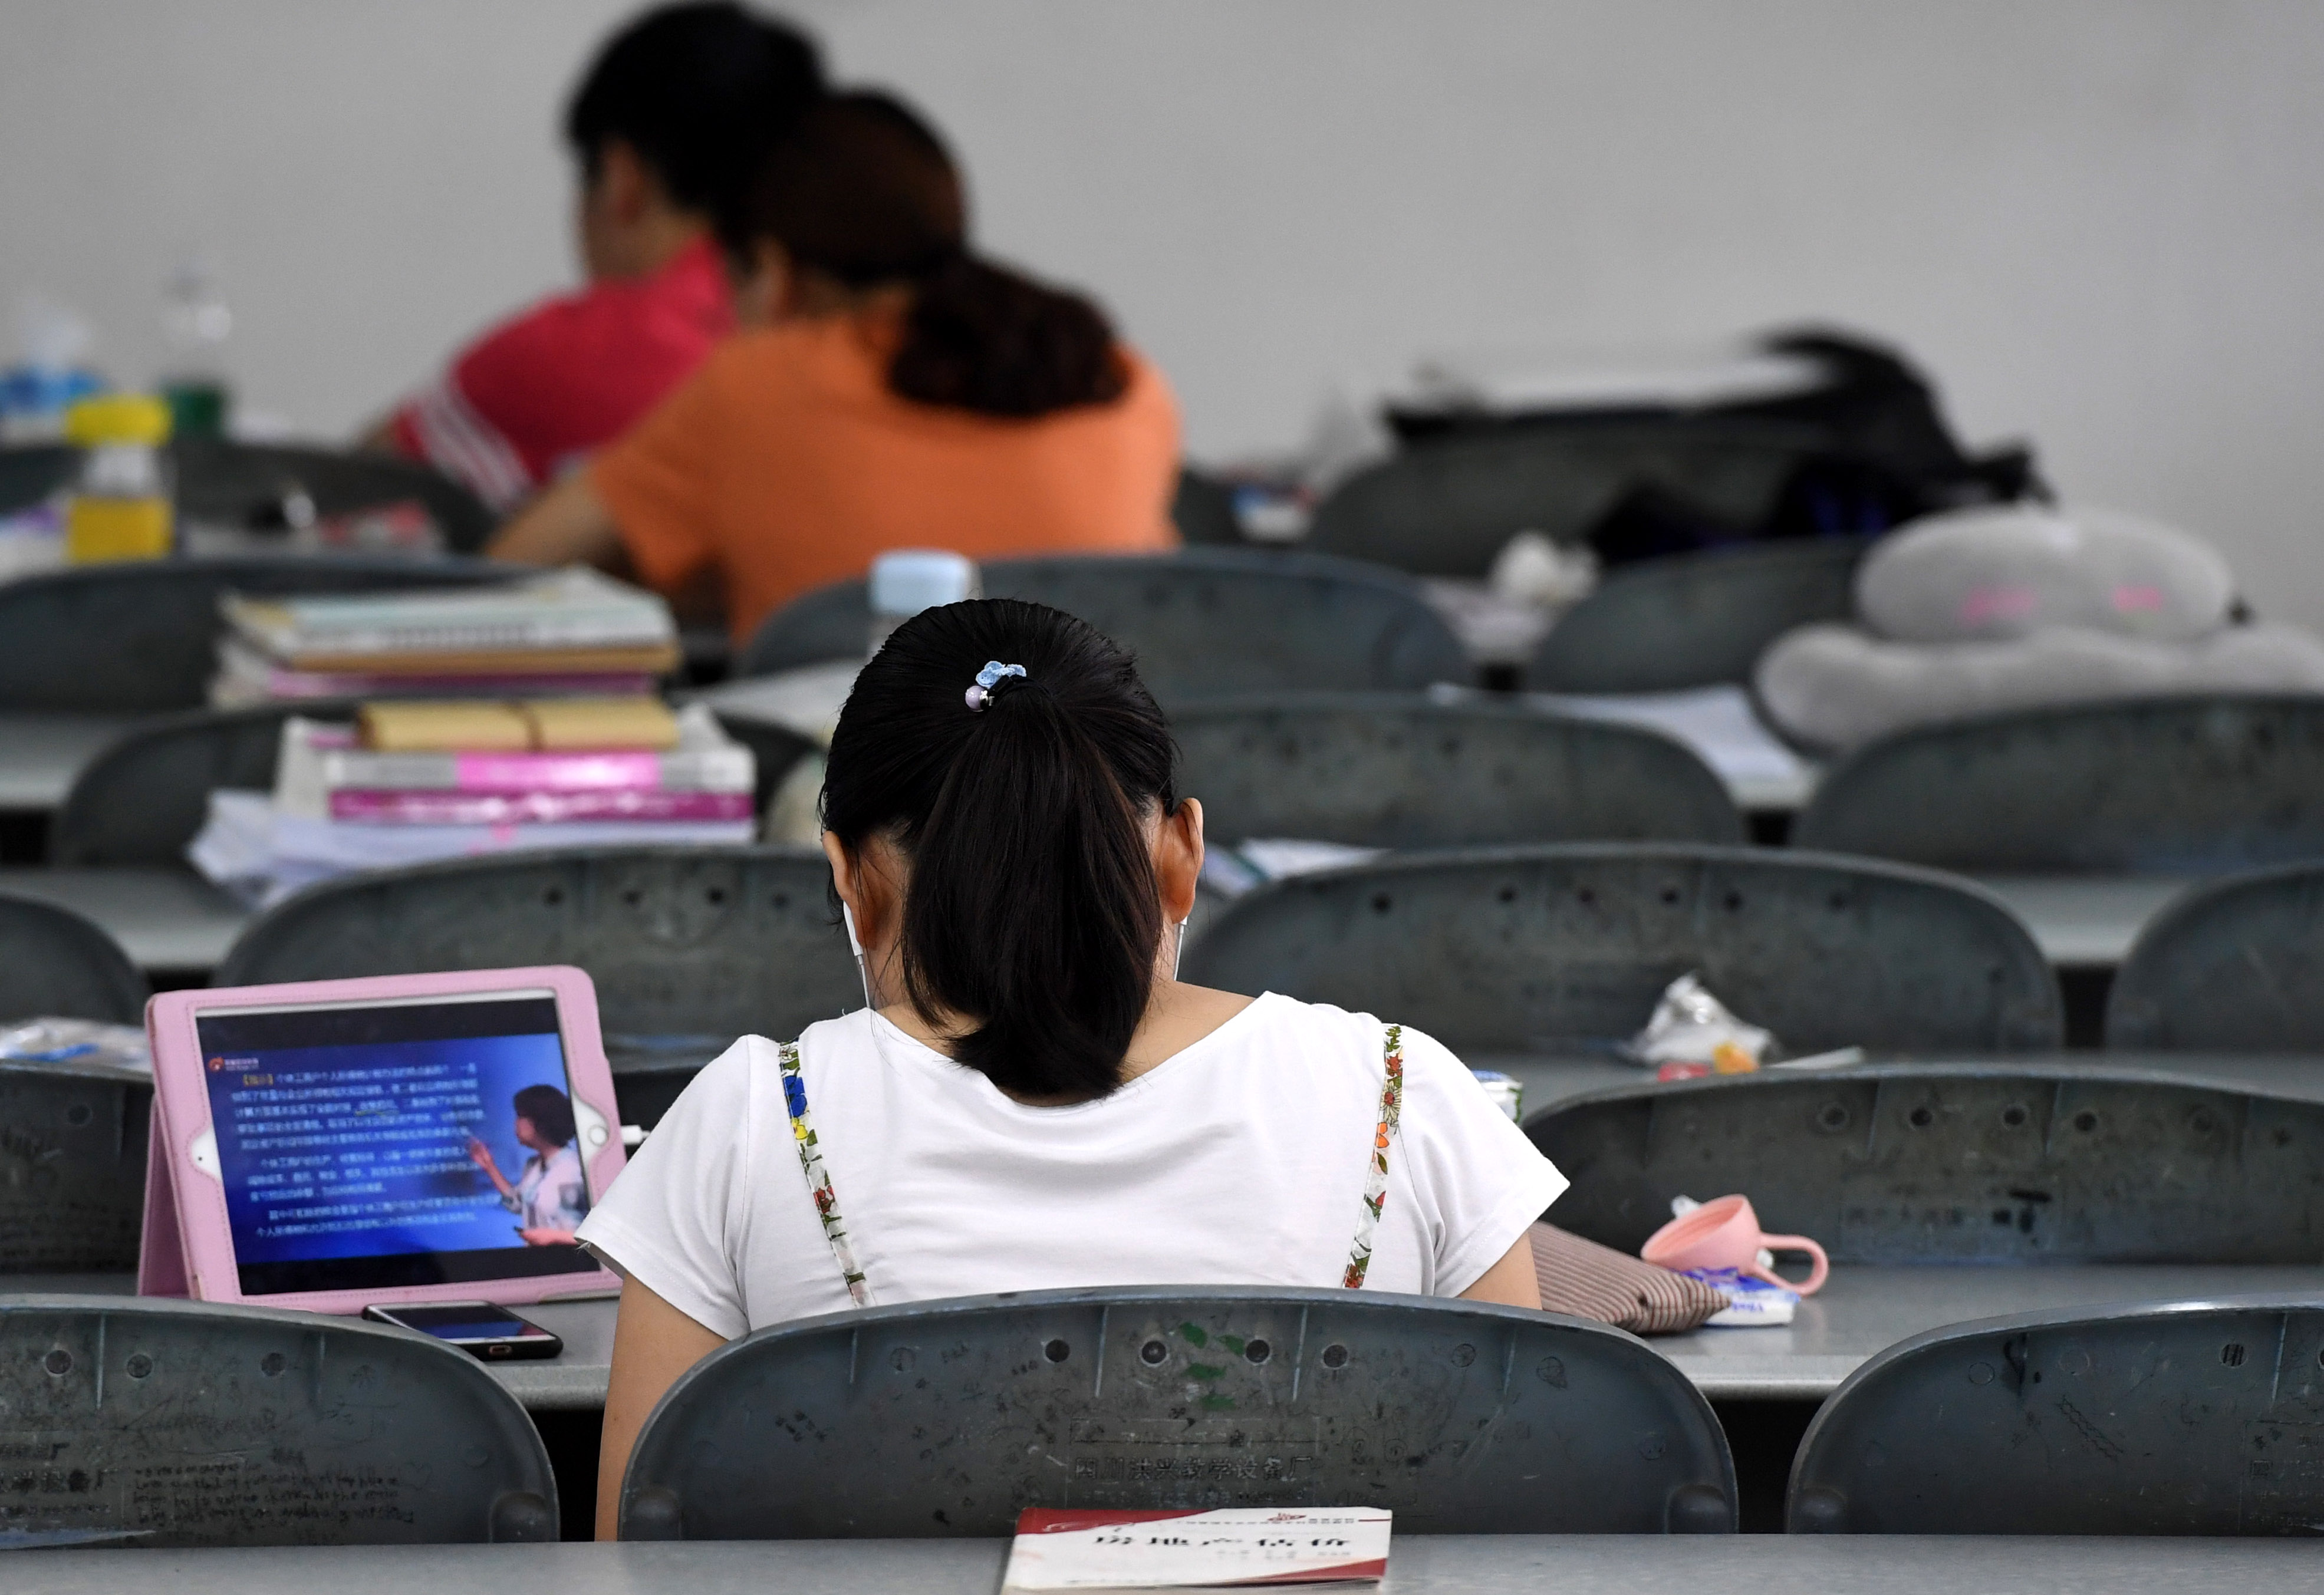 Getting the best out of online learning | Brookings